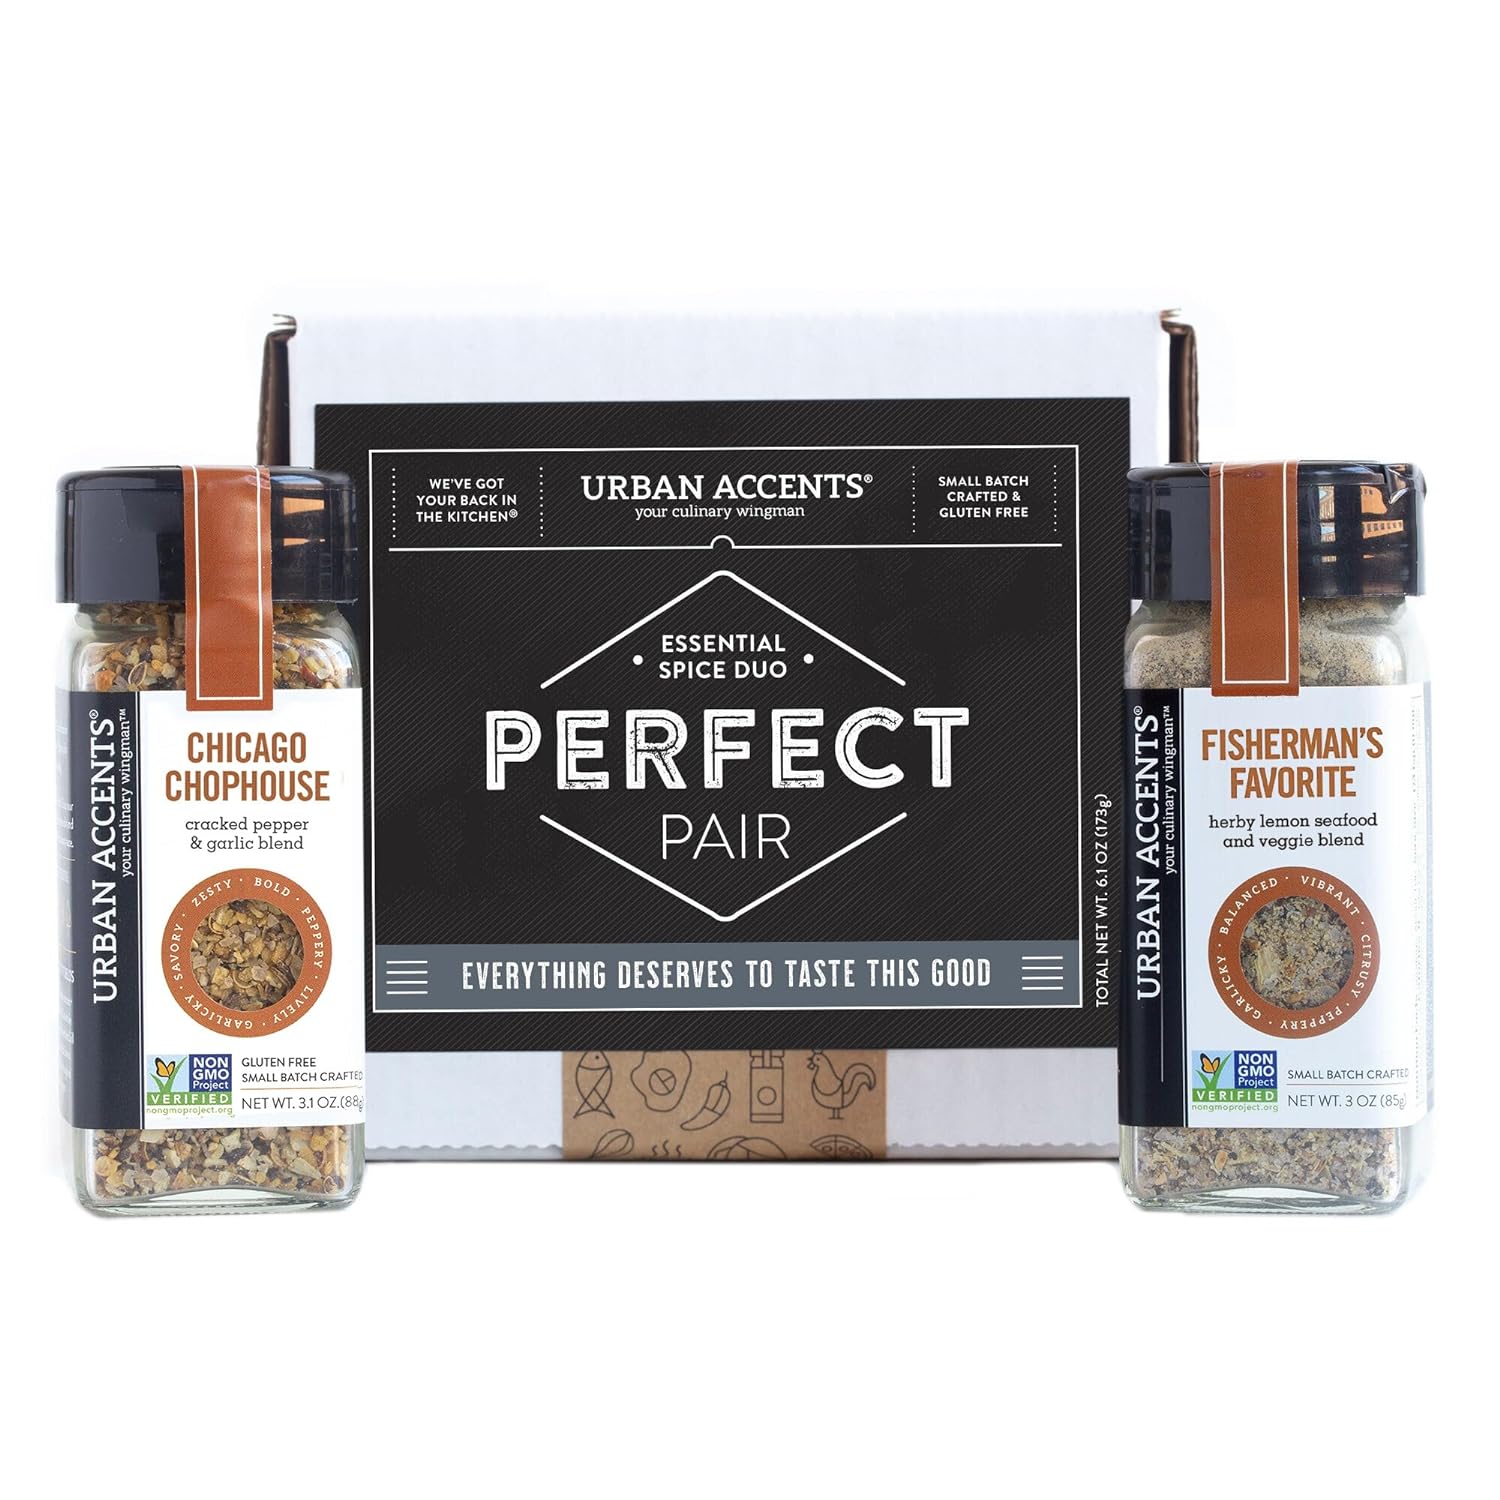 Urban Accents PERFECT PAIR, Essential Gourmet Spices Gift Set (Set of 2) - Two All Natural Versatile Spice Blends Perfect for any Meal